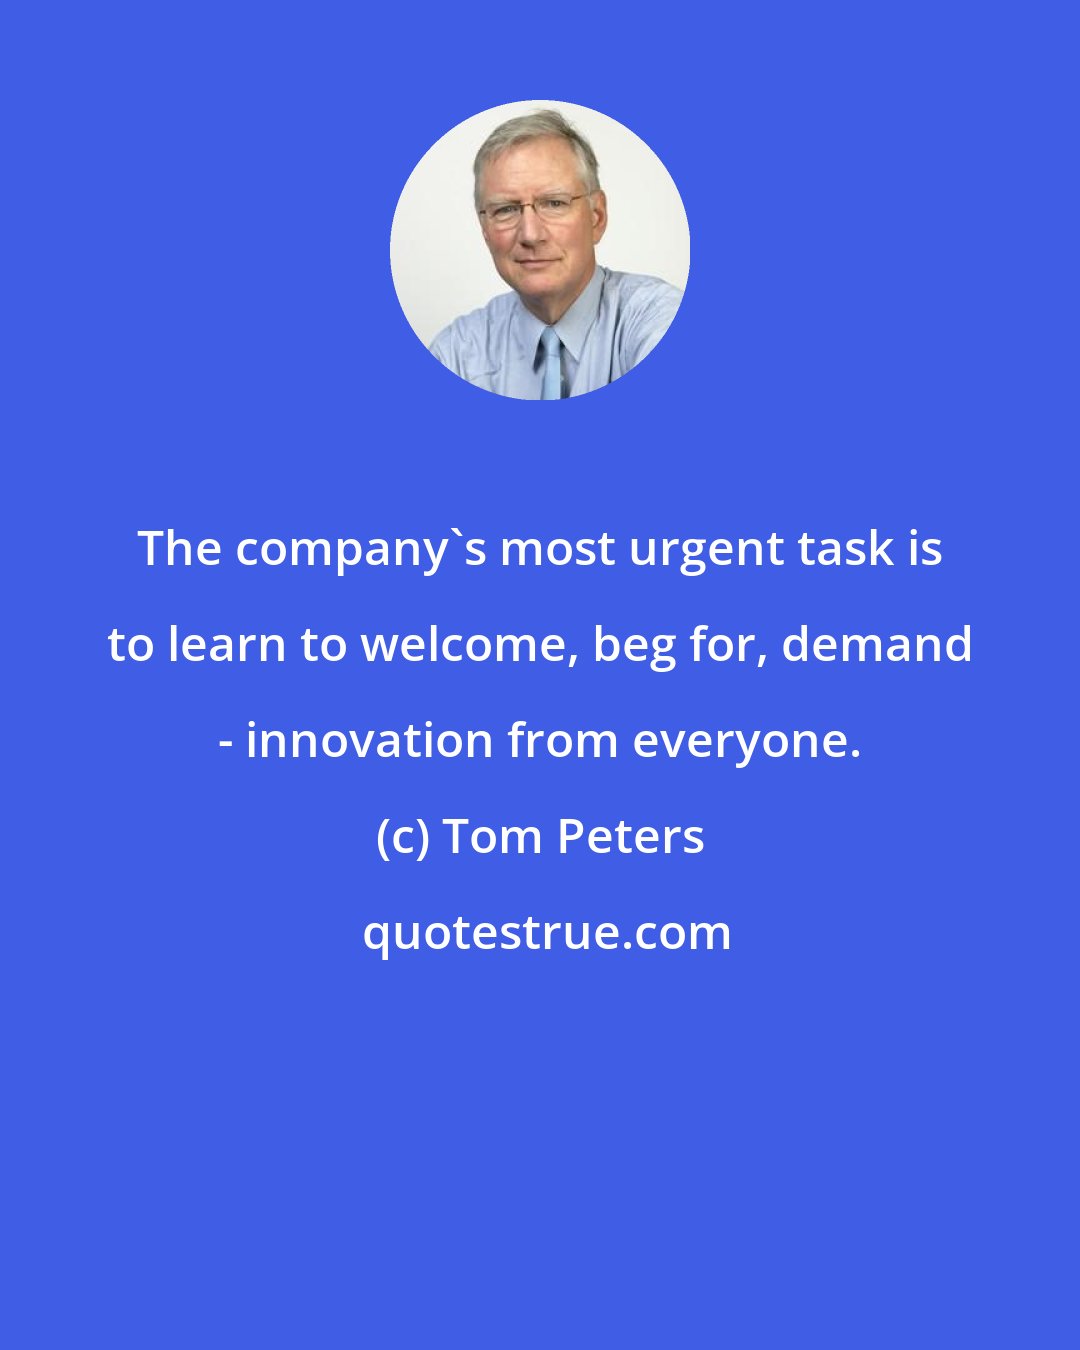 Tom Peters: The company's most urgent task is to learn to welcome, beg for, demand - innovation from everyone.